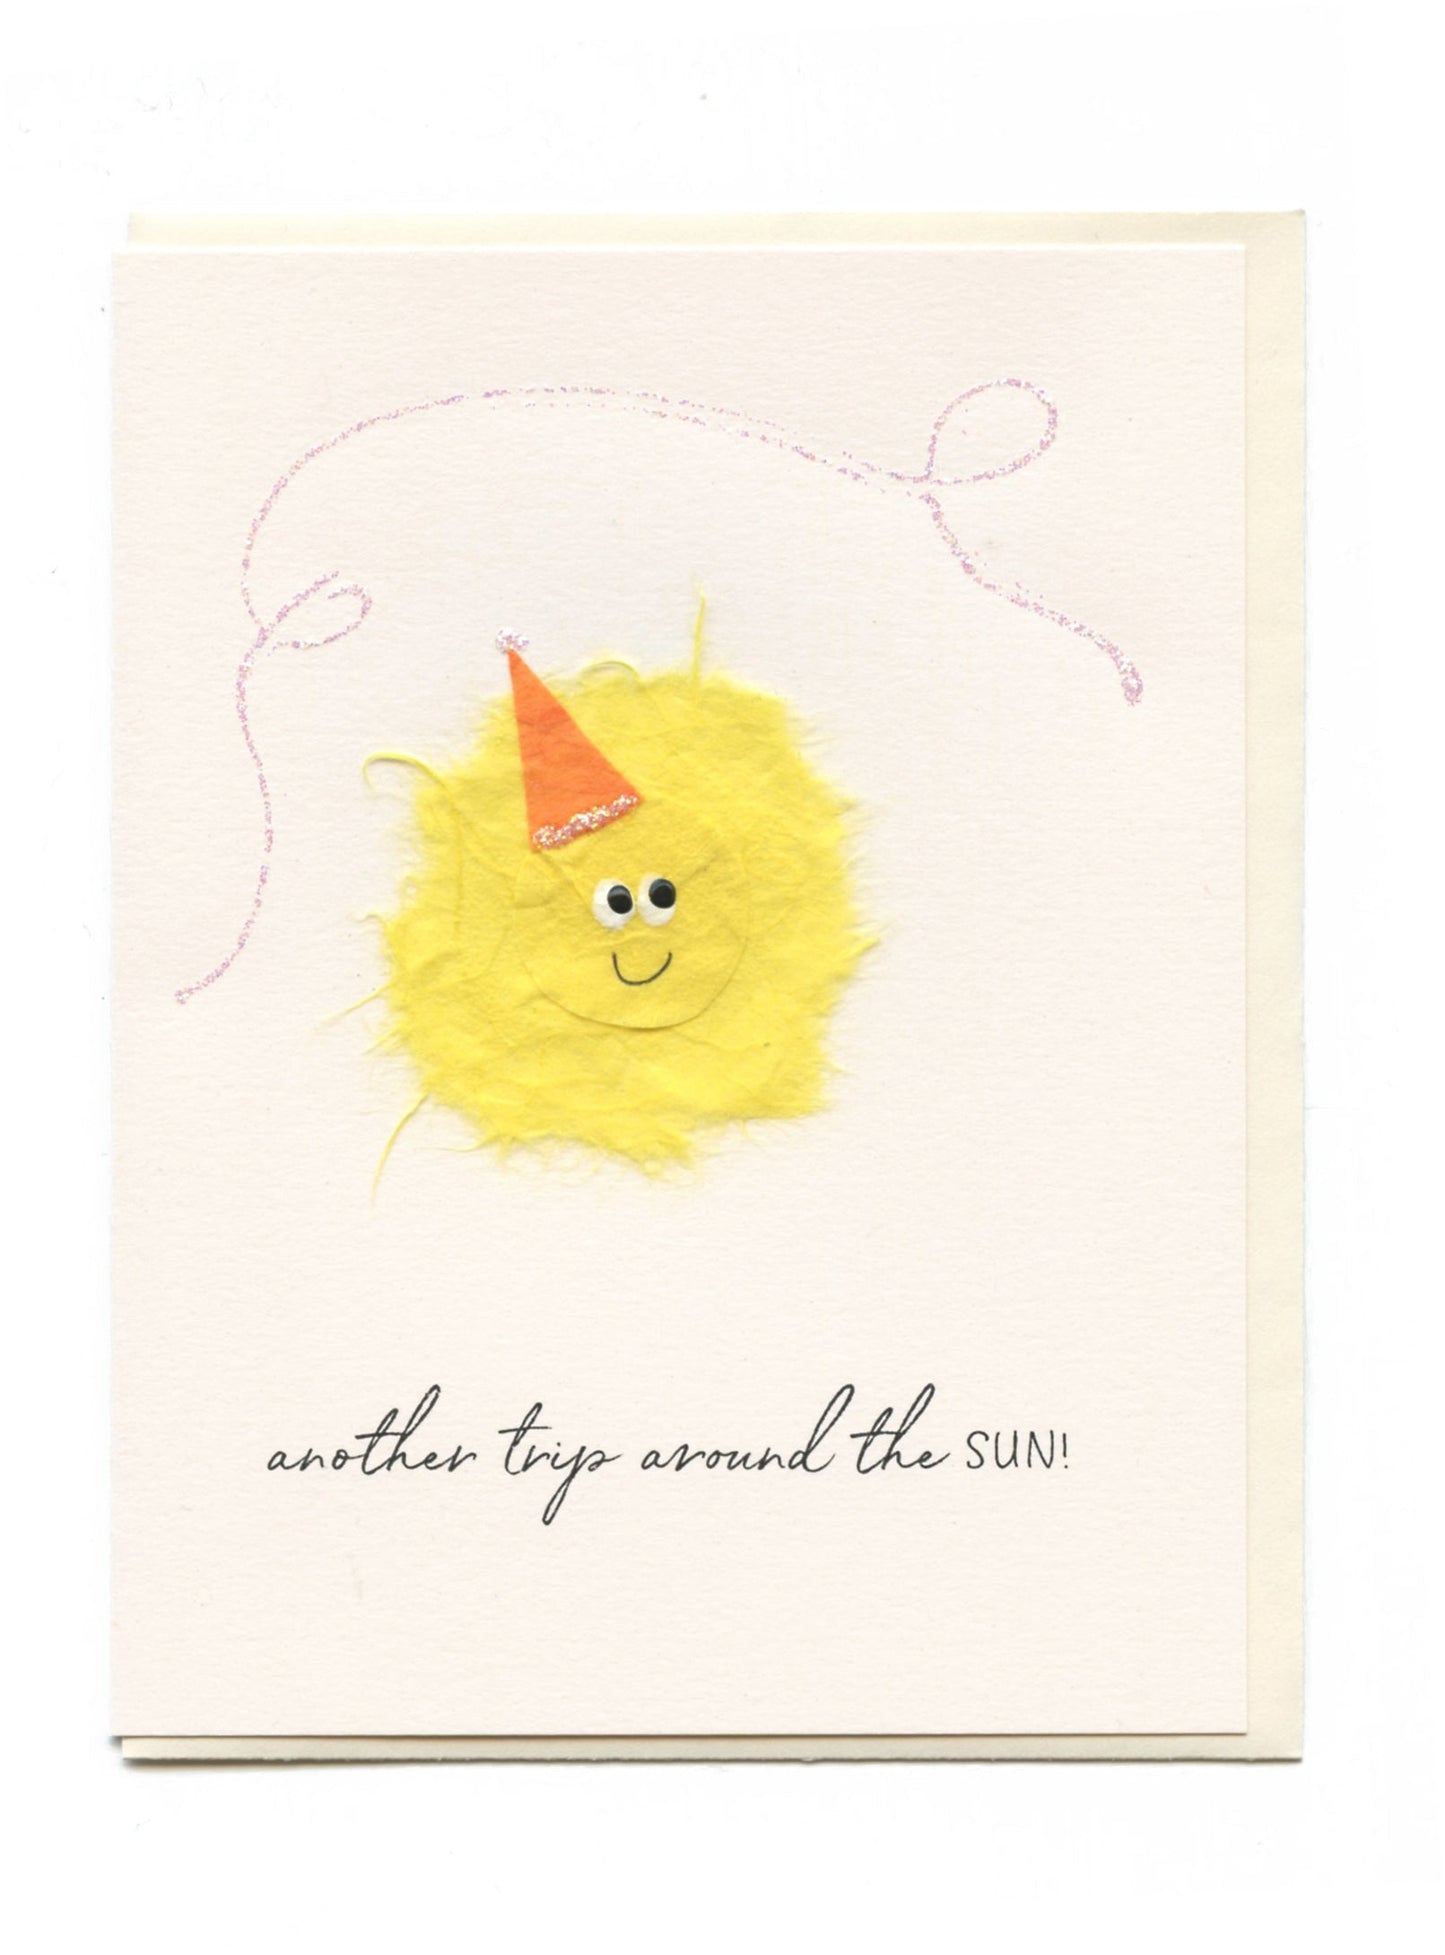 "Another Trip Around the Sun" Sun w/ party hat